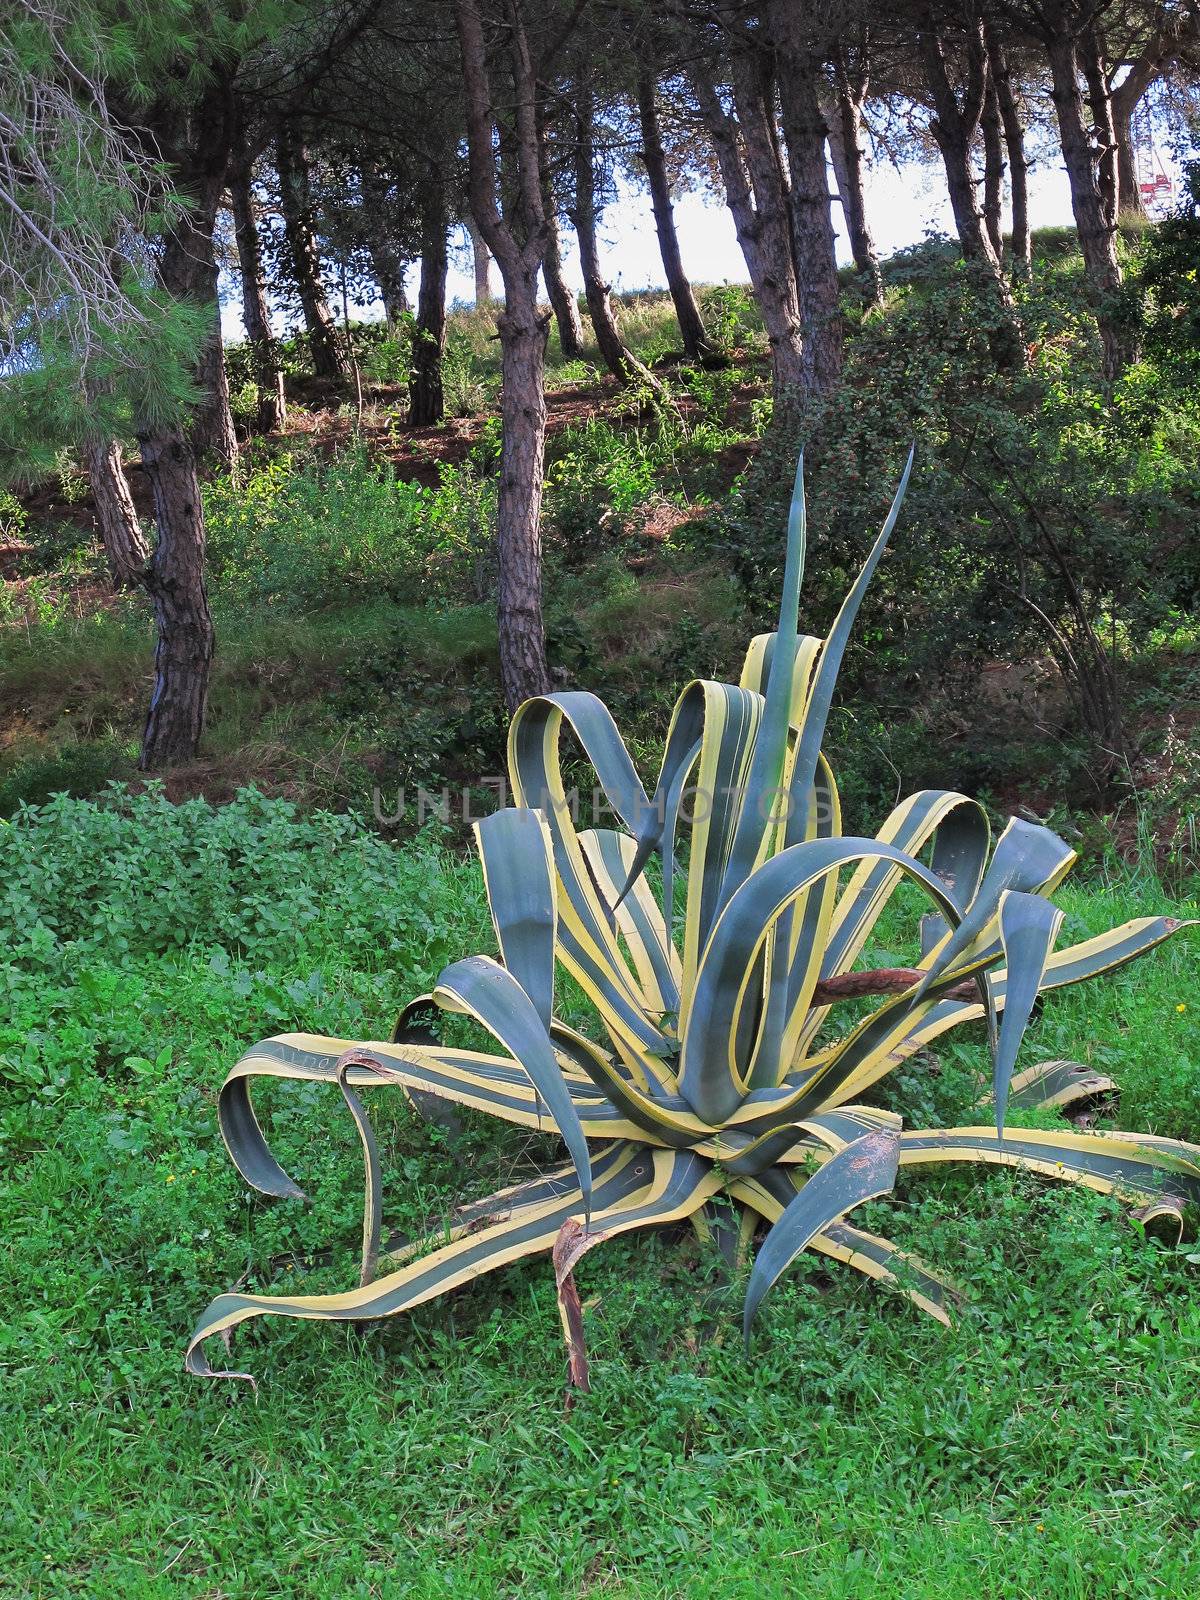 Agave americana as ornamental plant with trees in the background